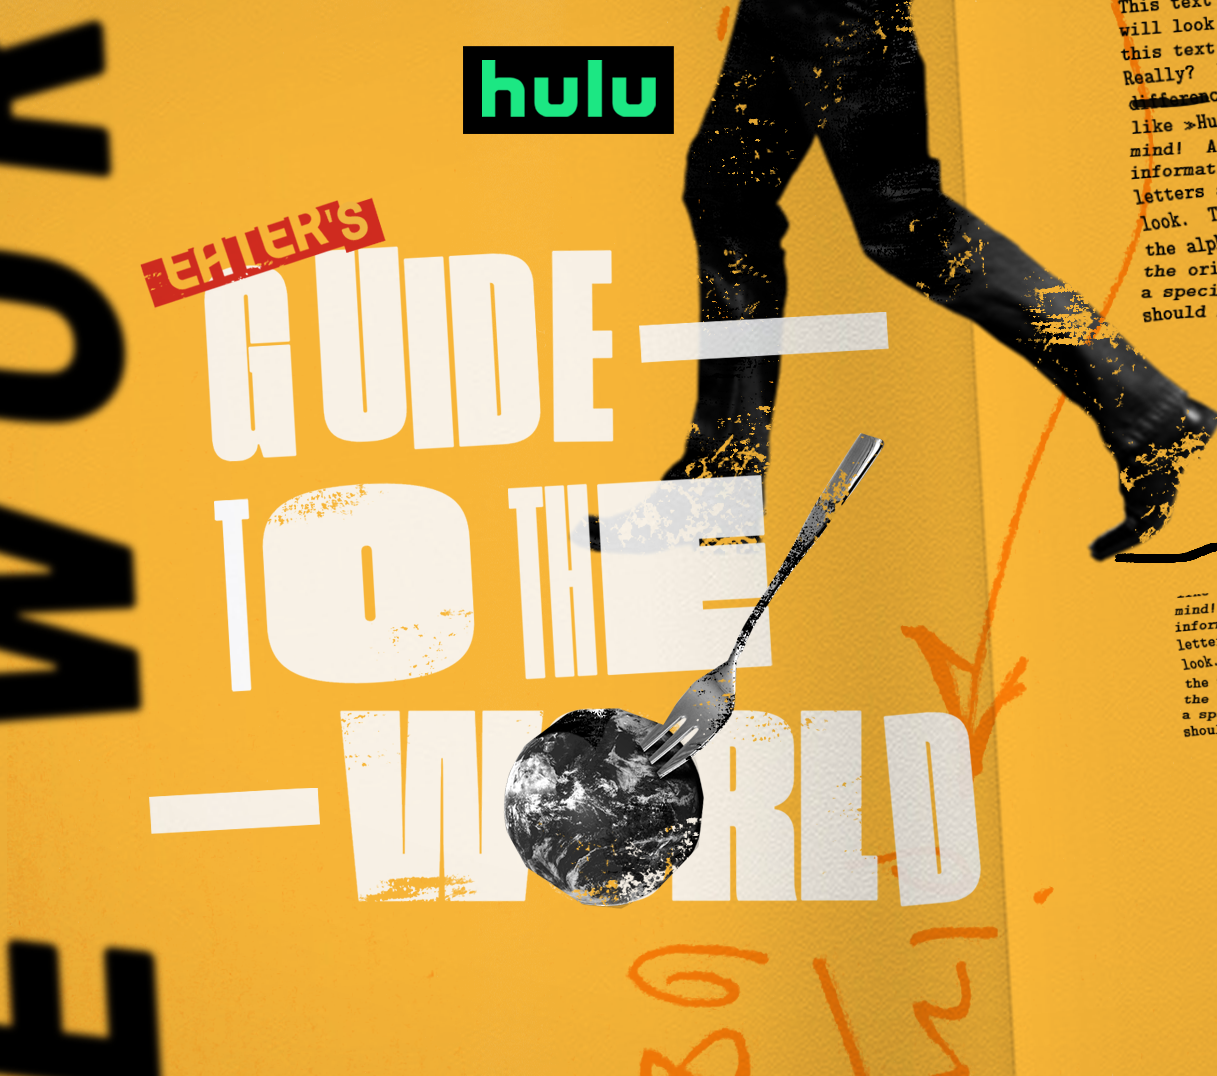 EATER’S GUIDE TO THE WORLD – Hulu